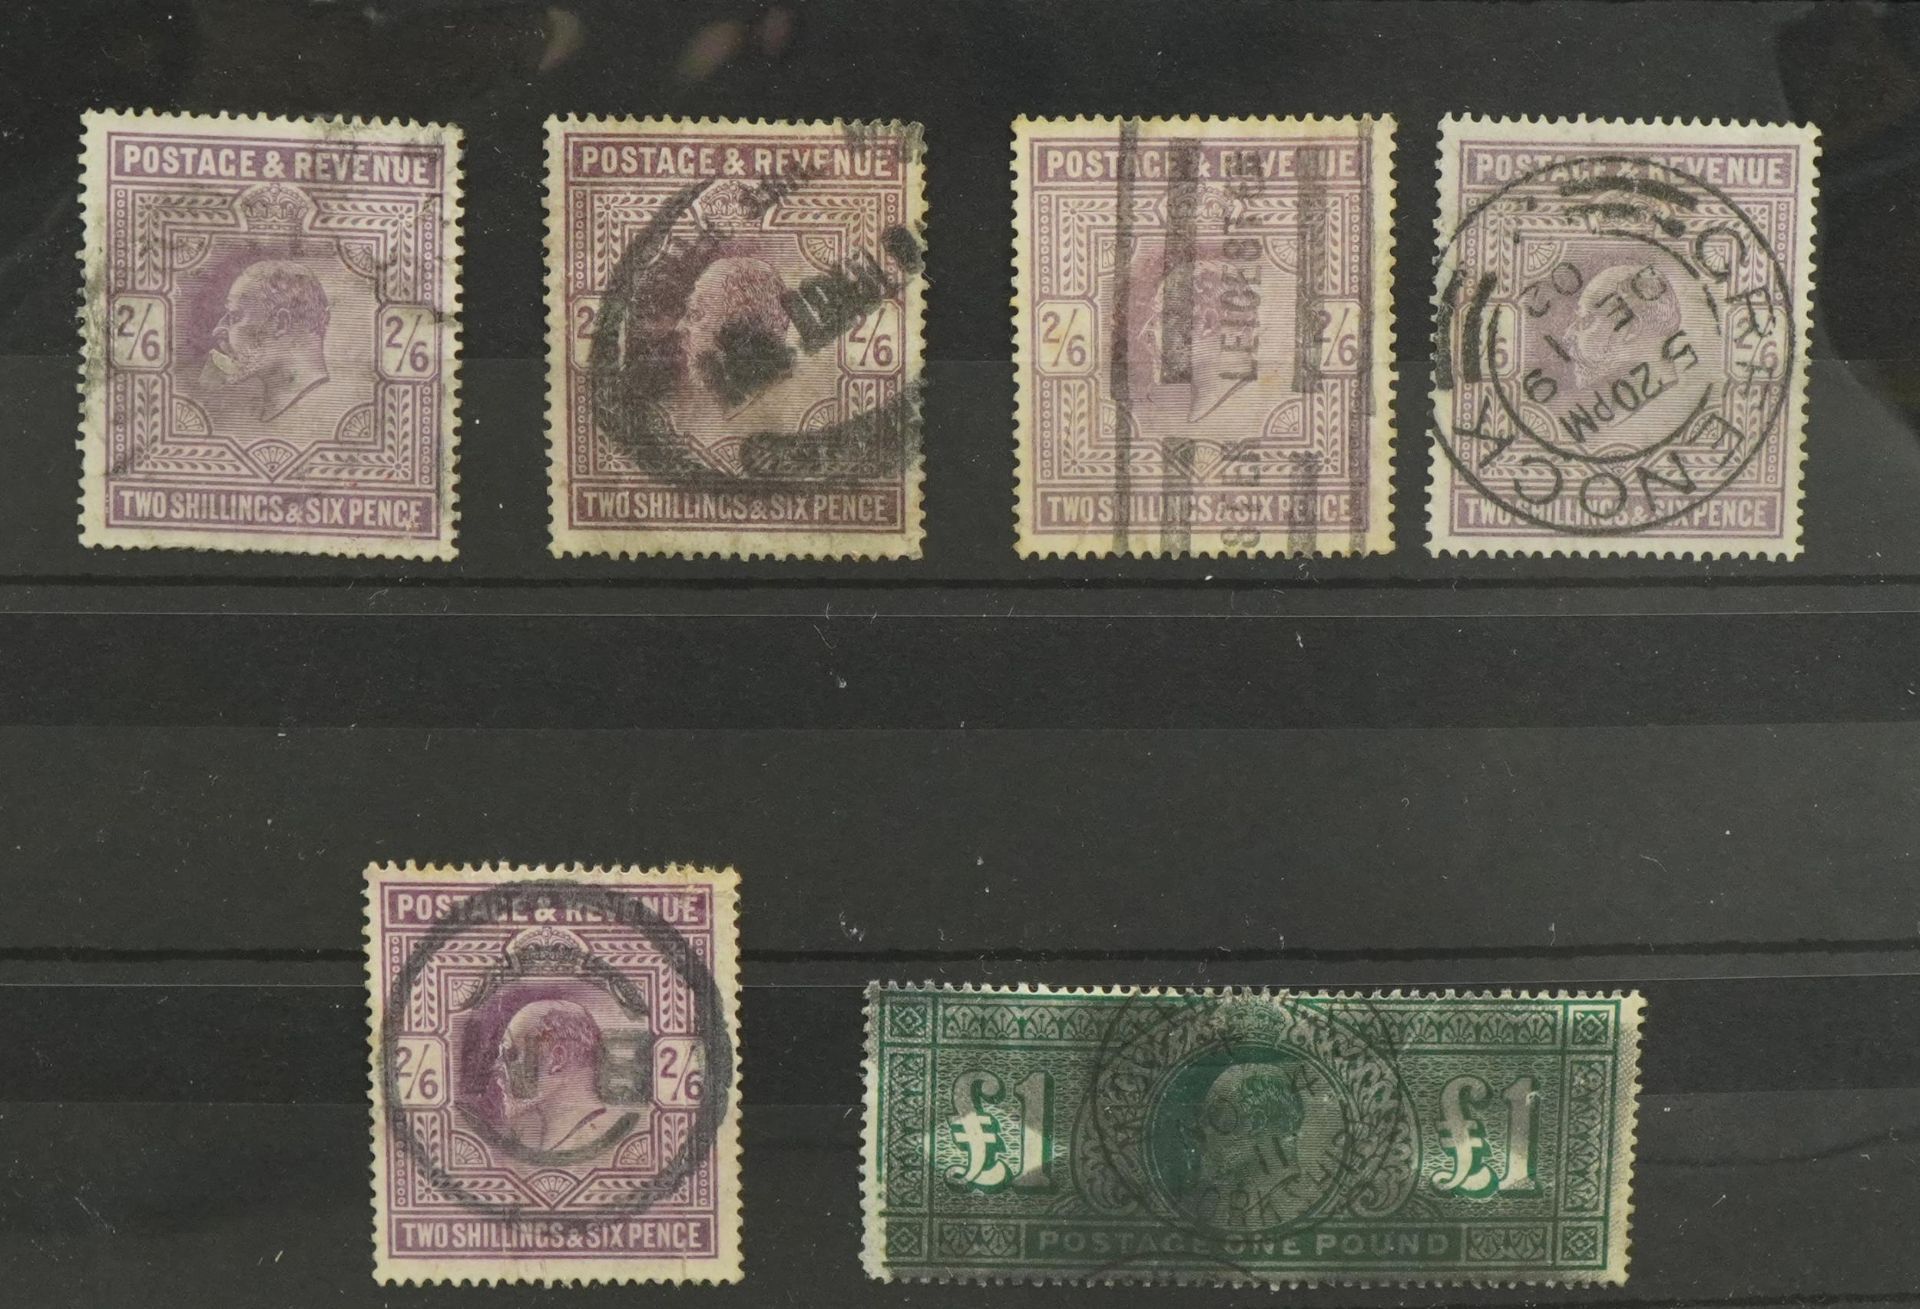 Edward VII high value stamps For further information on this lot please contact the auctioneer